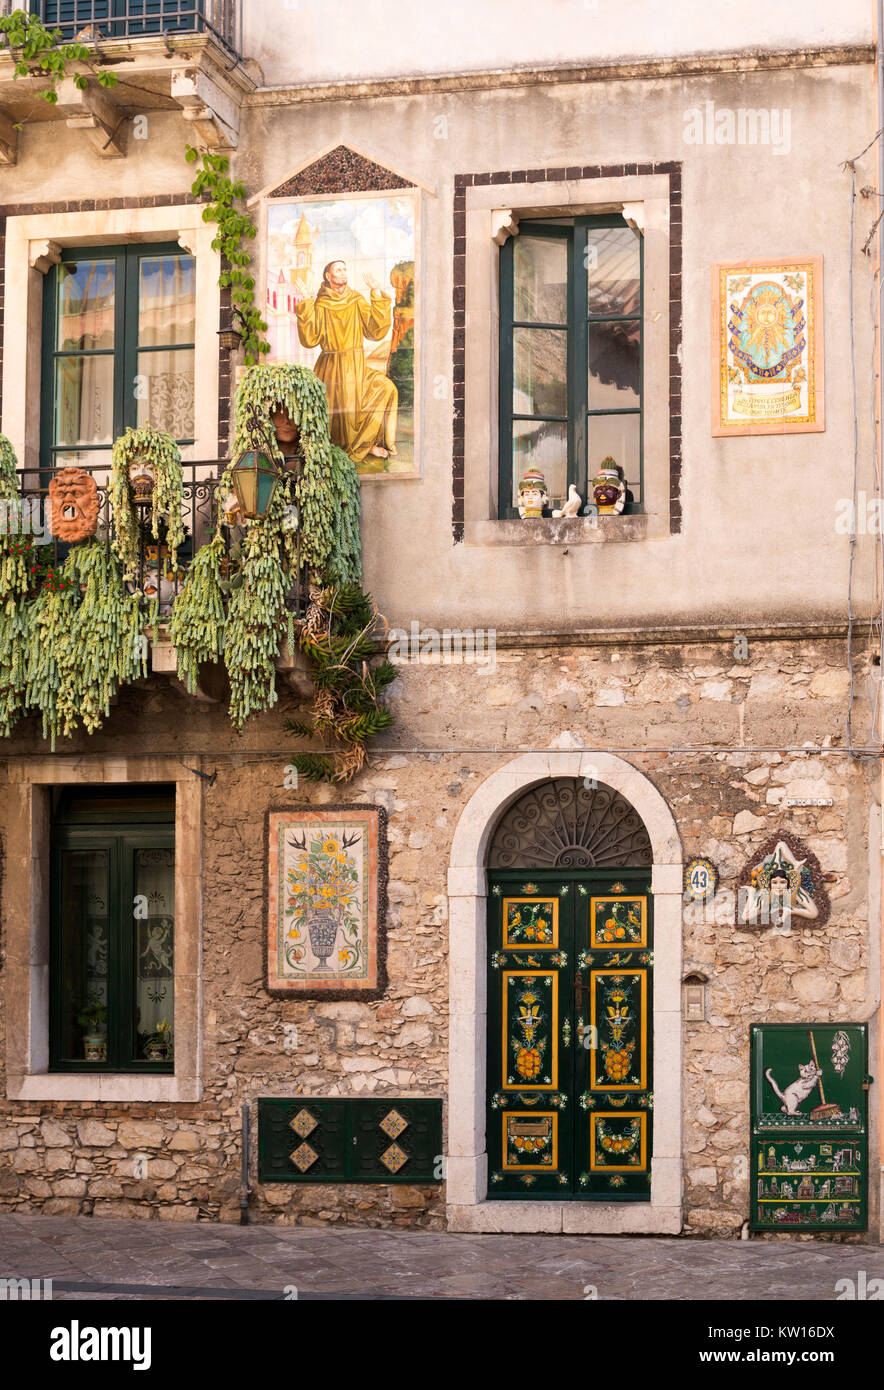 Town house decorated in traditional style using ceramics, Taormina, Sicily, Europe Stock Photo